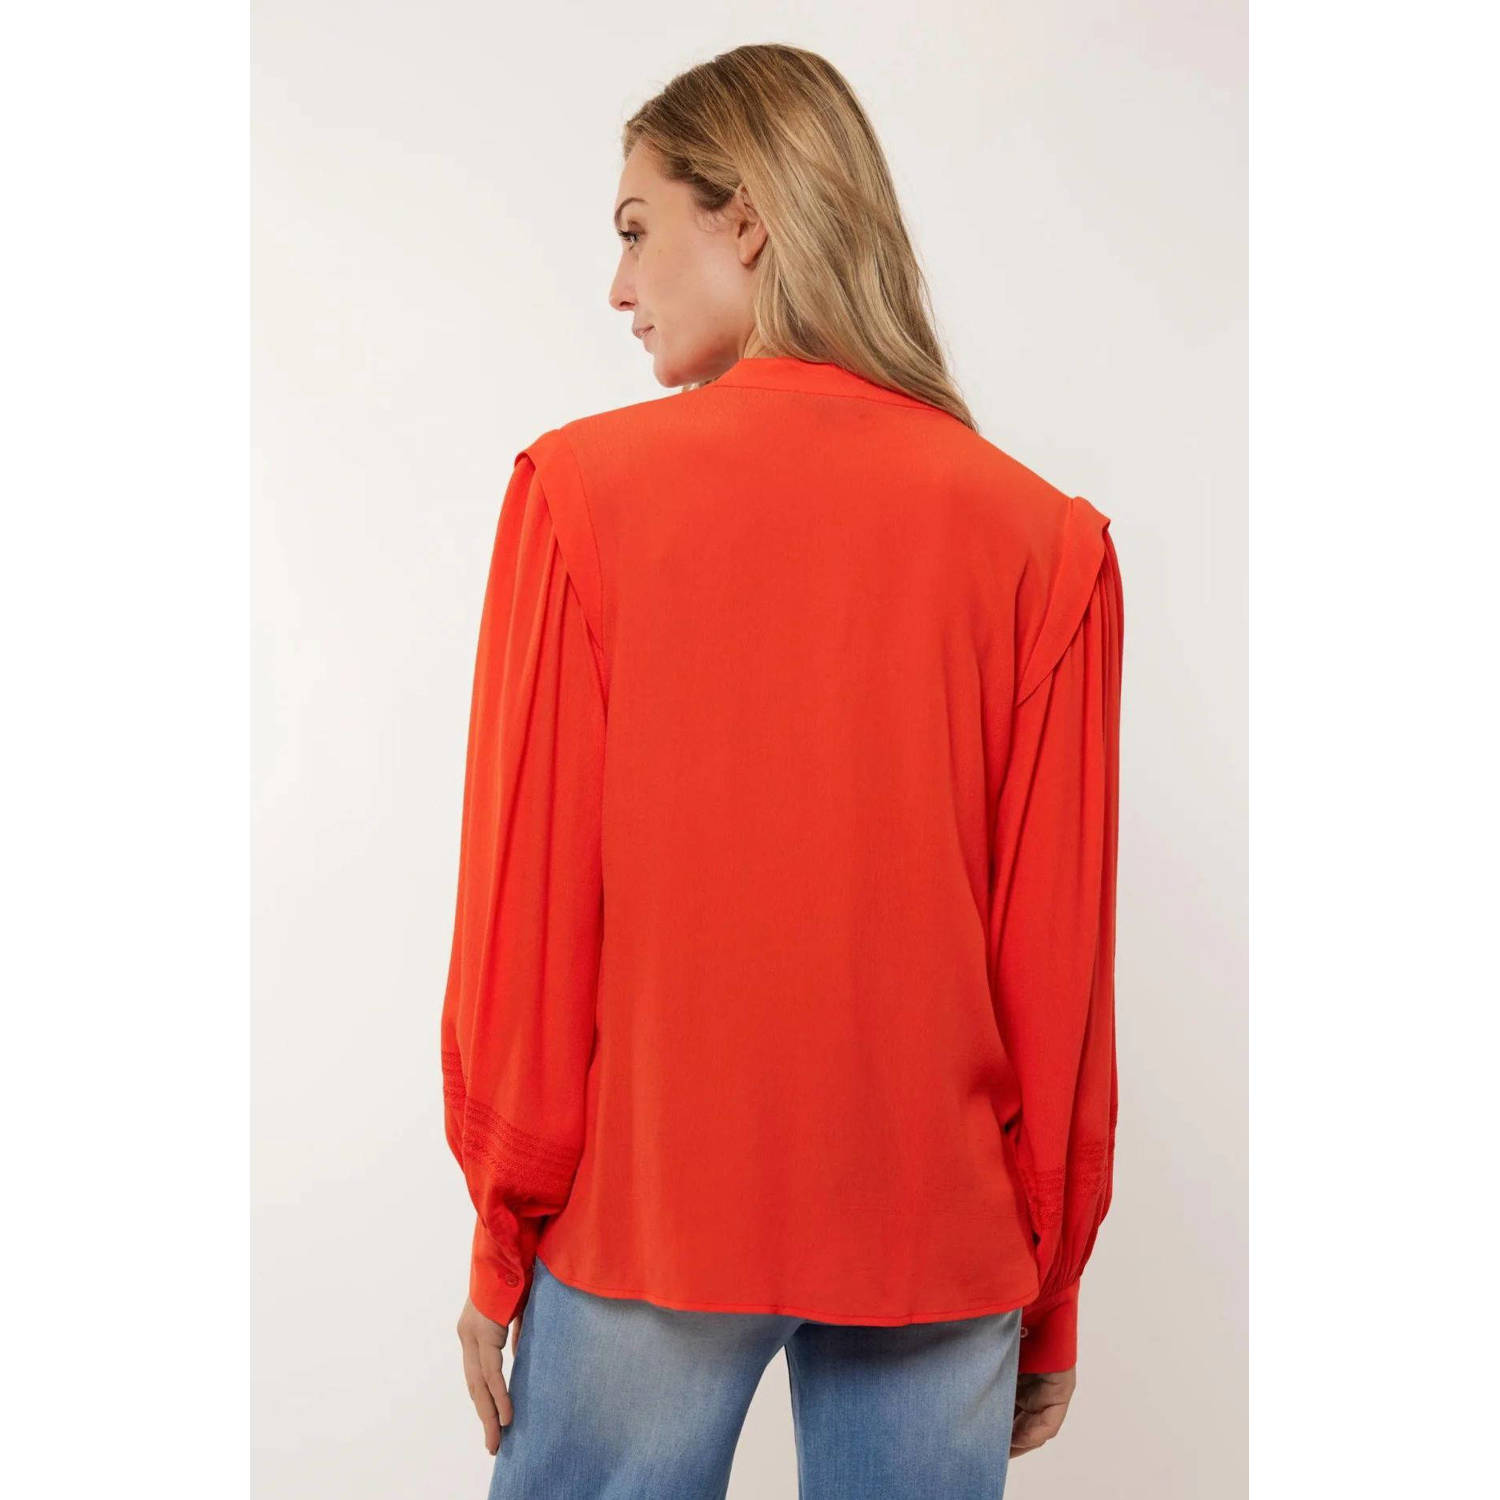 G-maxx blouse Beyonce rood